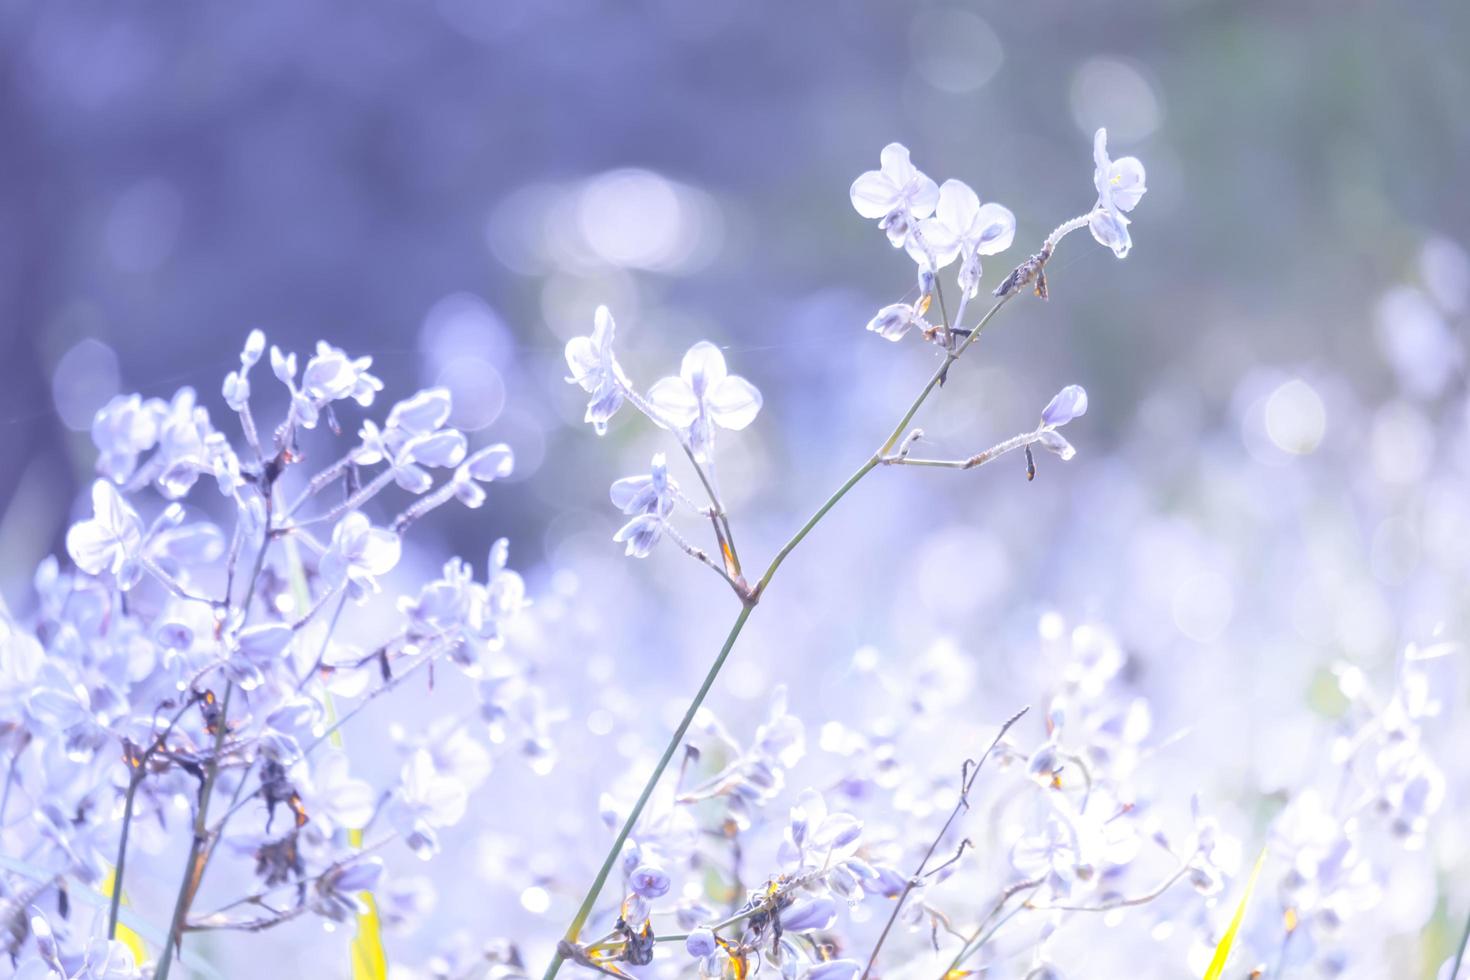 Blurred,Purple flower blossom on field. Beautiful growing and flowers on meadow blooming in the morning,selective focus nature on bokeh background,vintage style photo